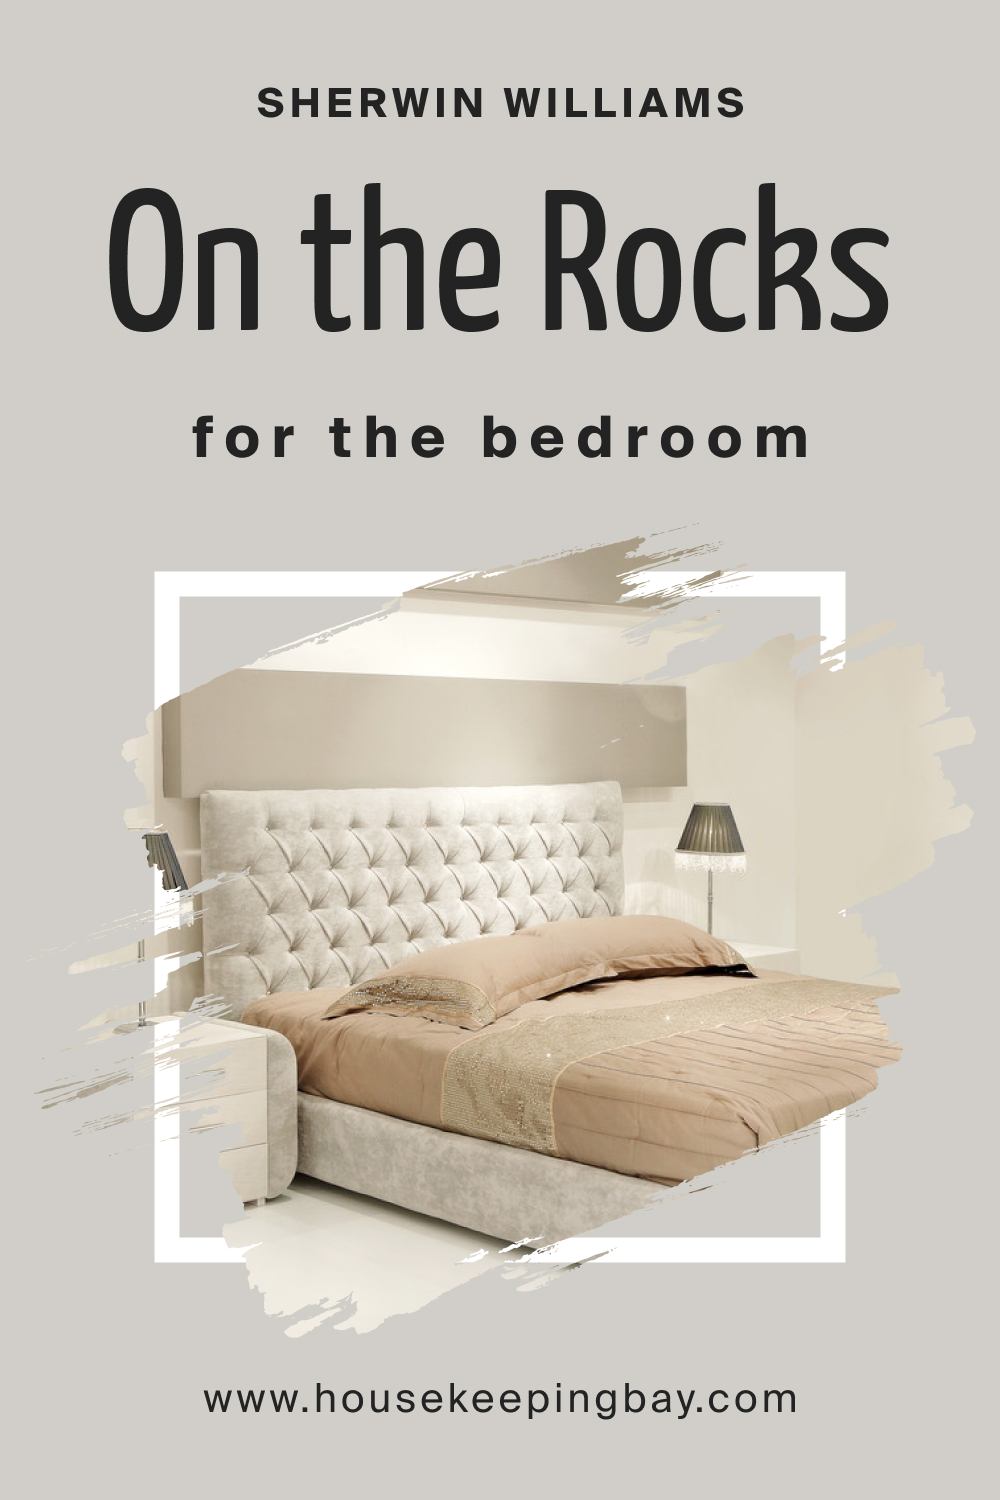 Sherwin Williams. On the Rocks SW 7671 For the bedroom